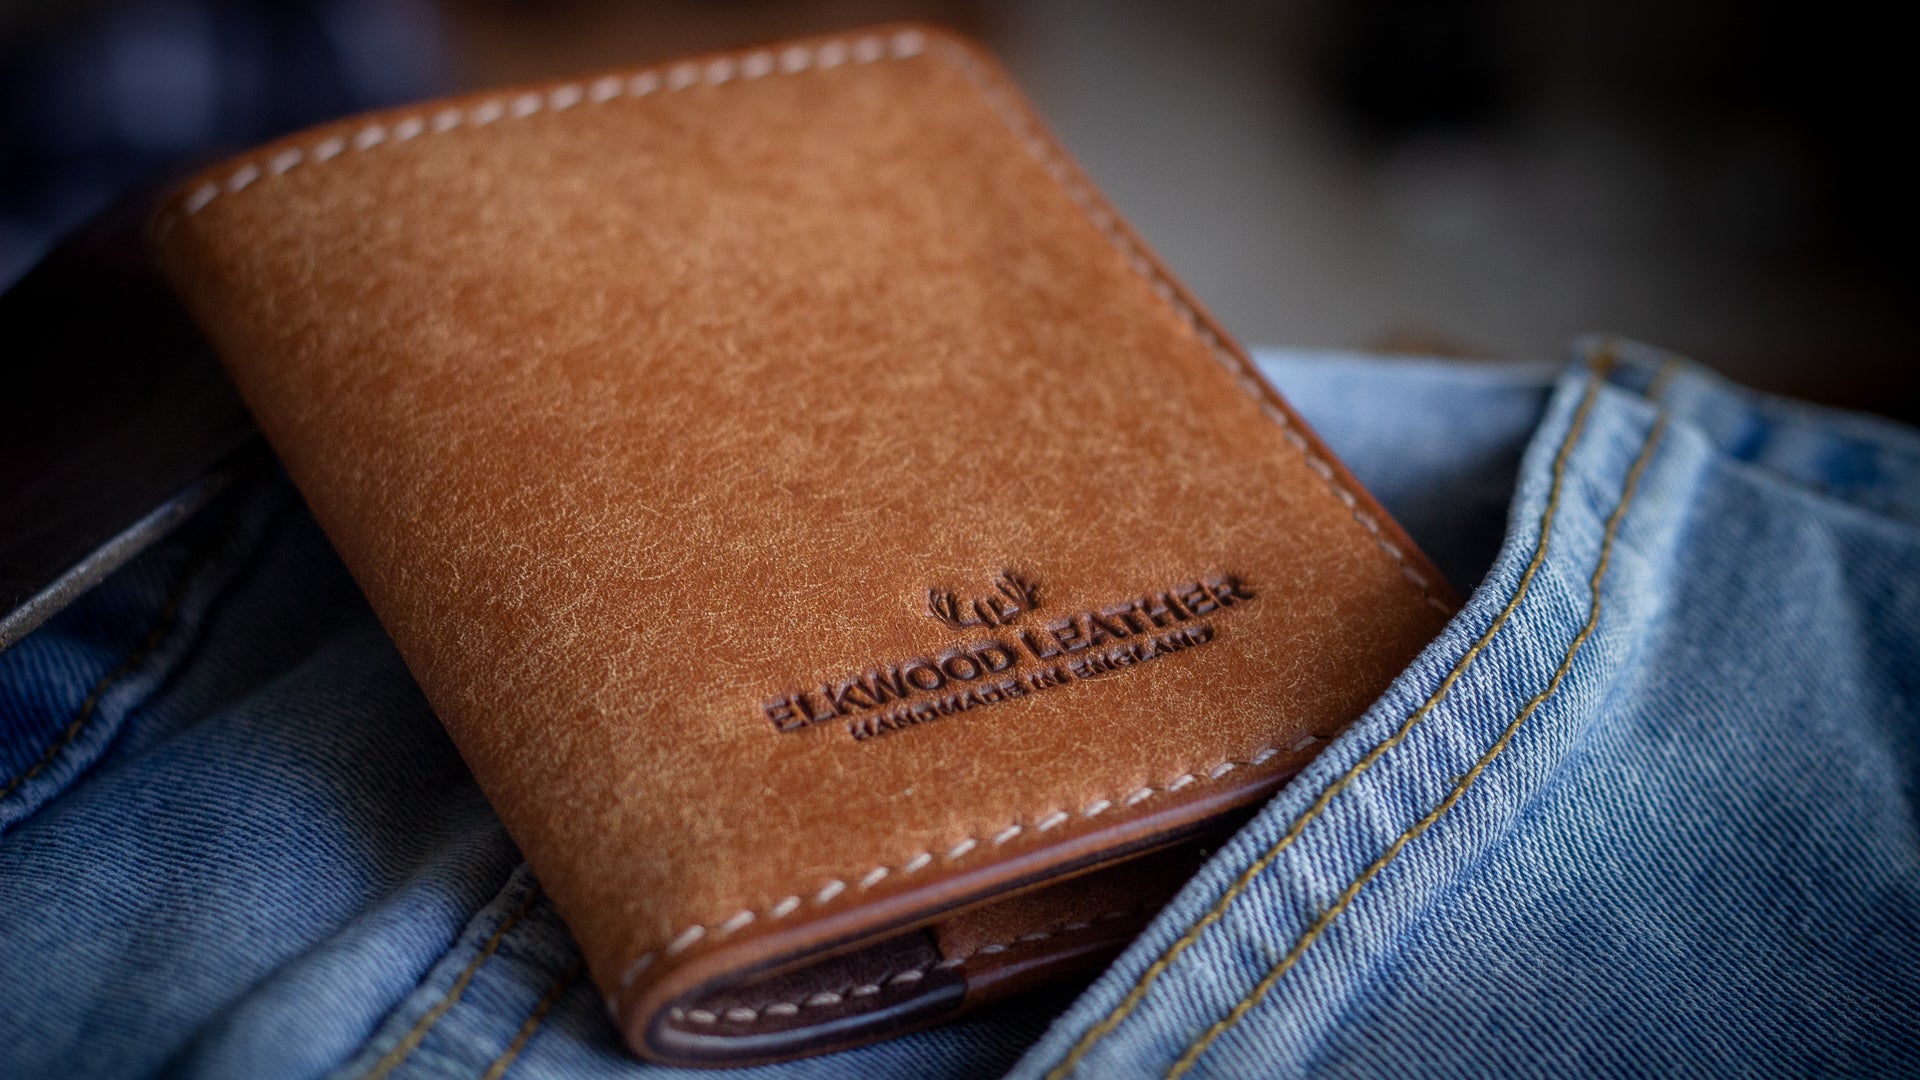 Elkwood leather brown bifold wallet closed coming out of blue jean pocket